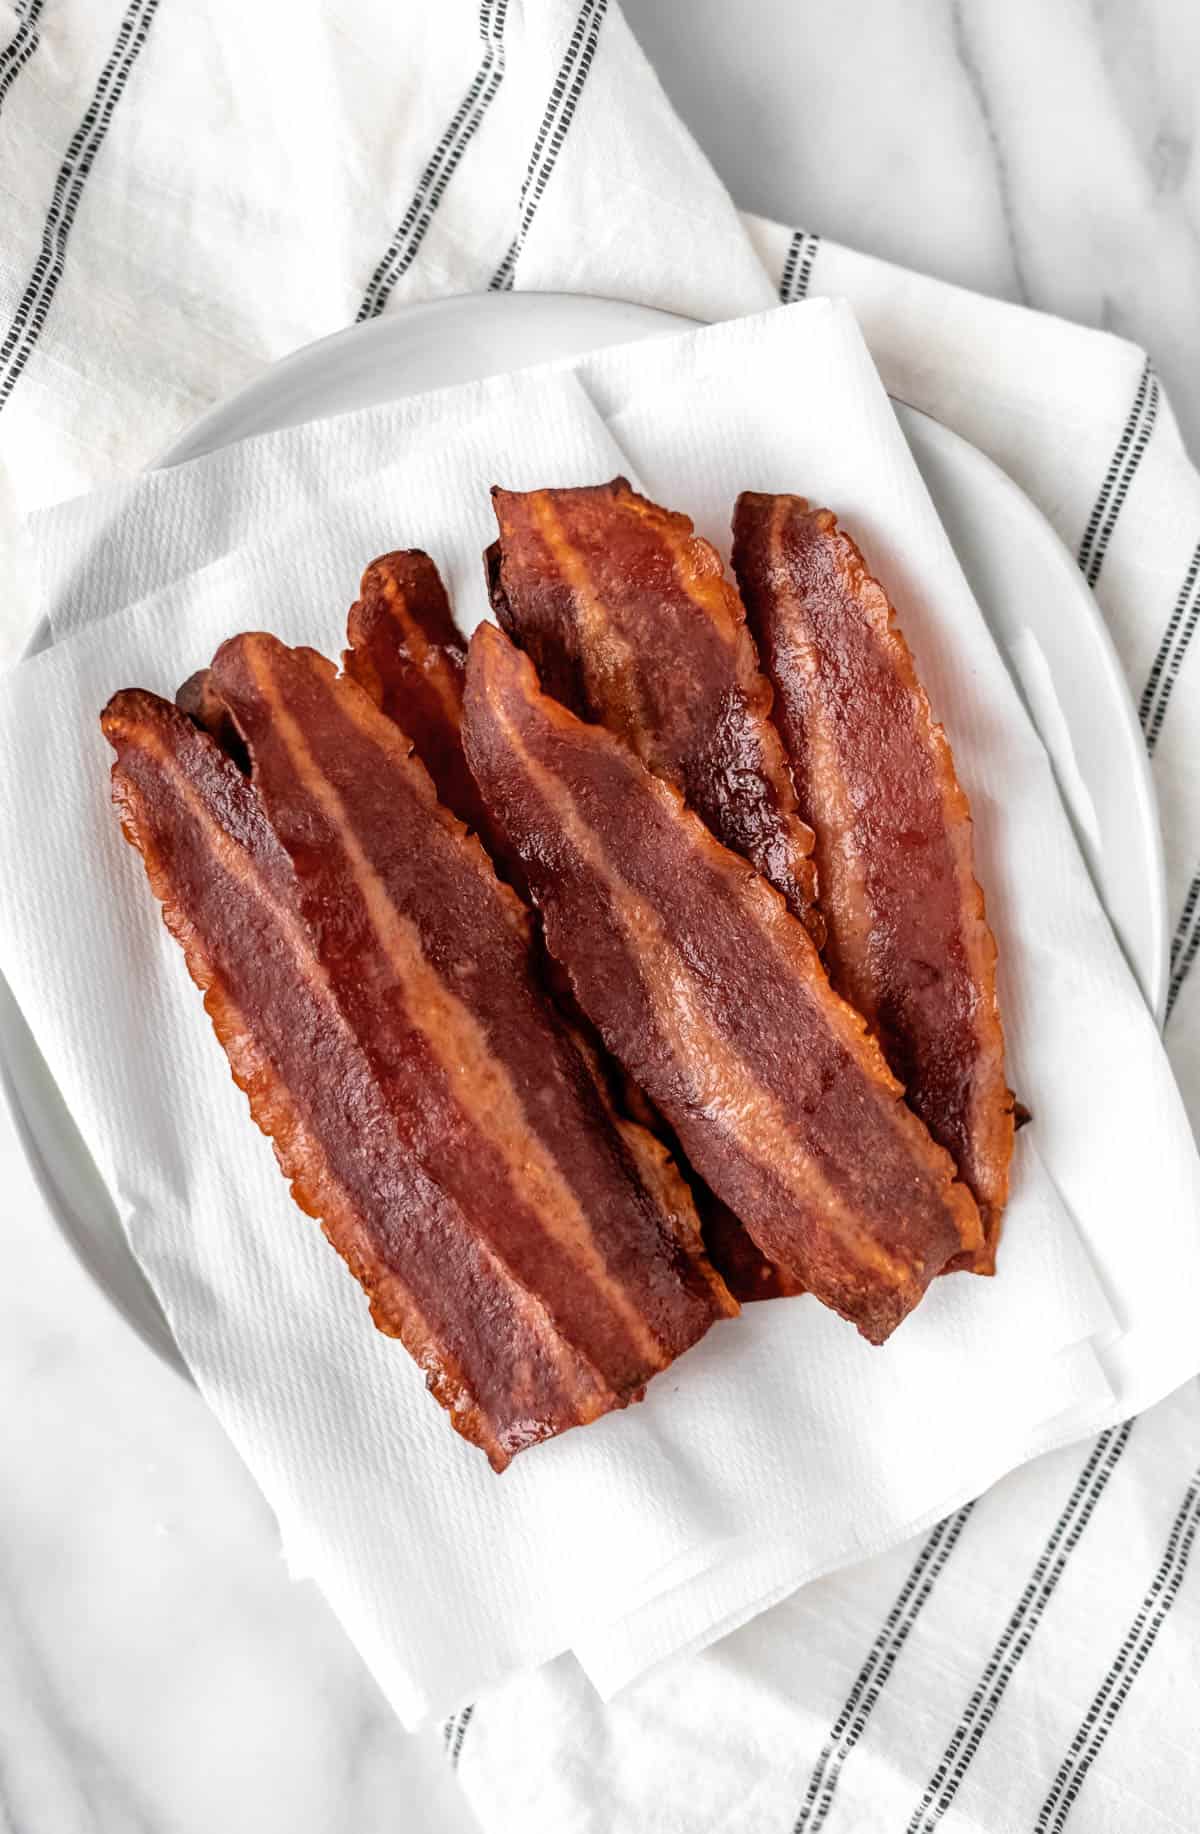 Cooked turkey bacon piled on a paper towel lined plate.